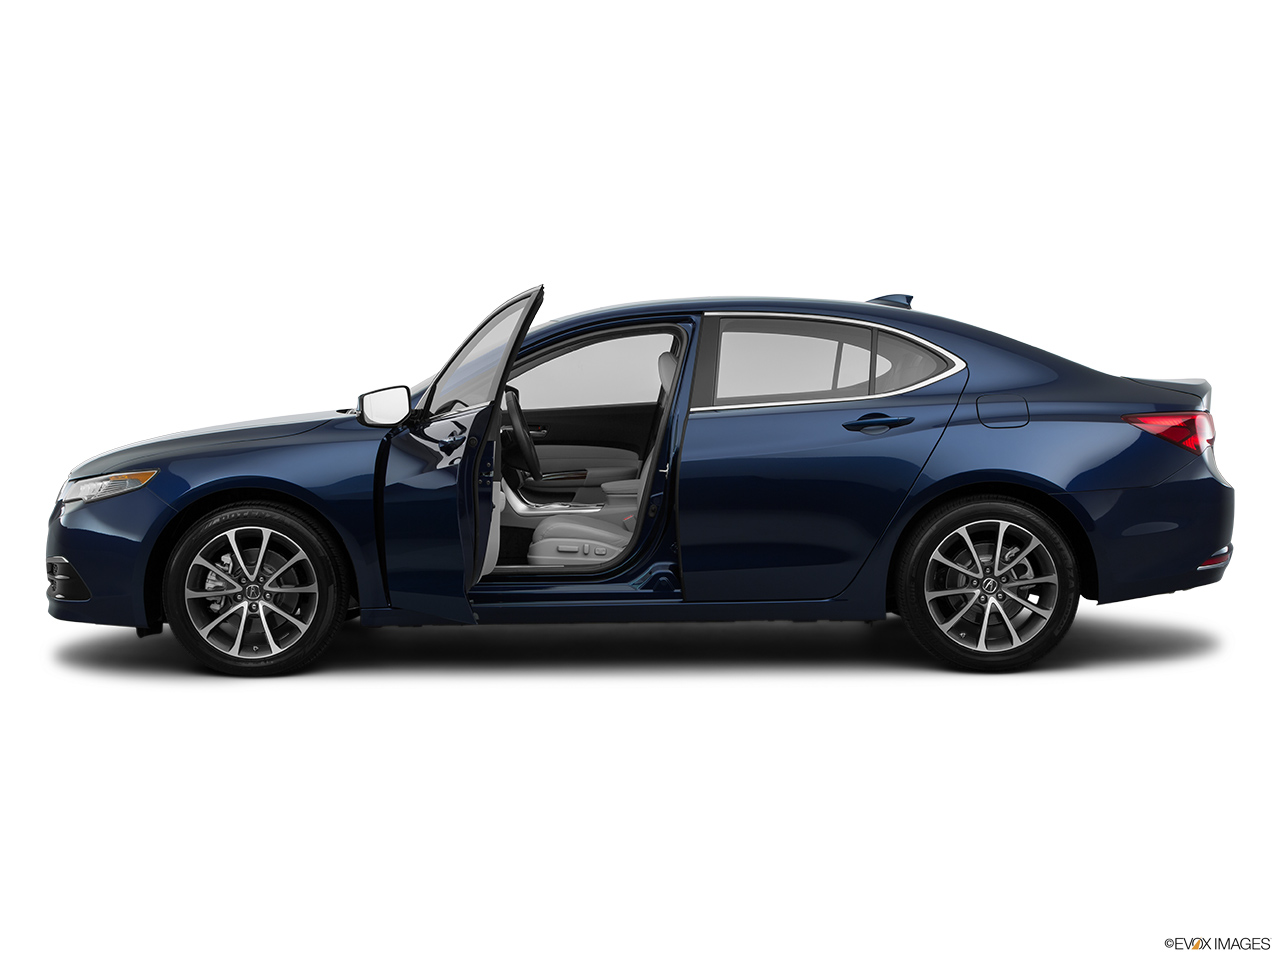 2016 Acura TLX 3.5 V-6 9-AT P-AWS Driver's side profile with drivers side door open. 